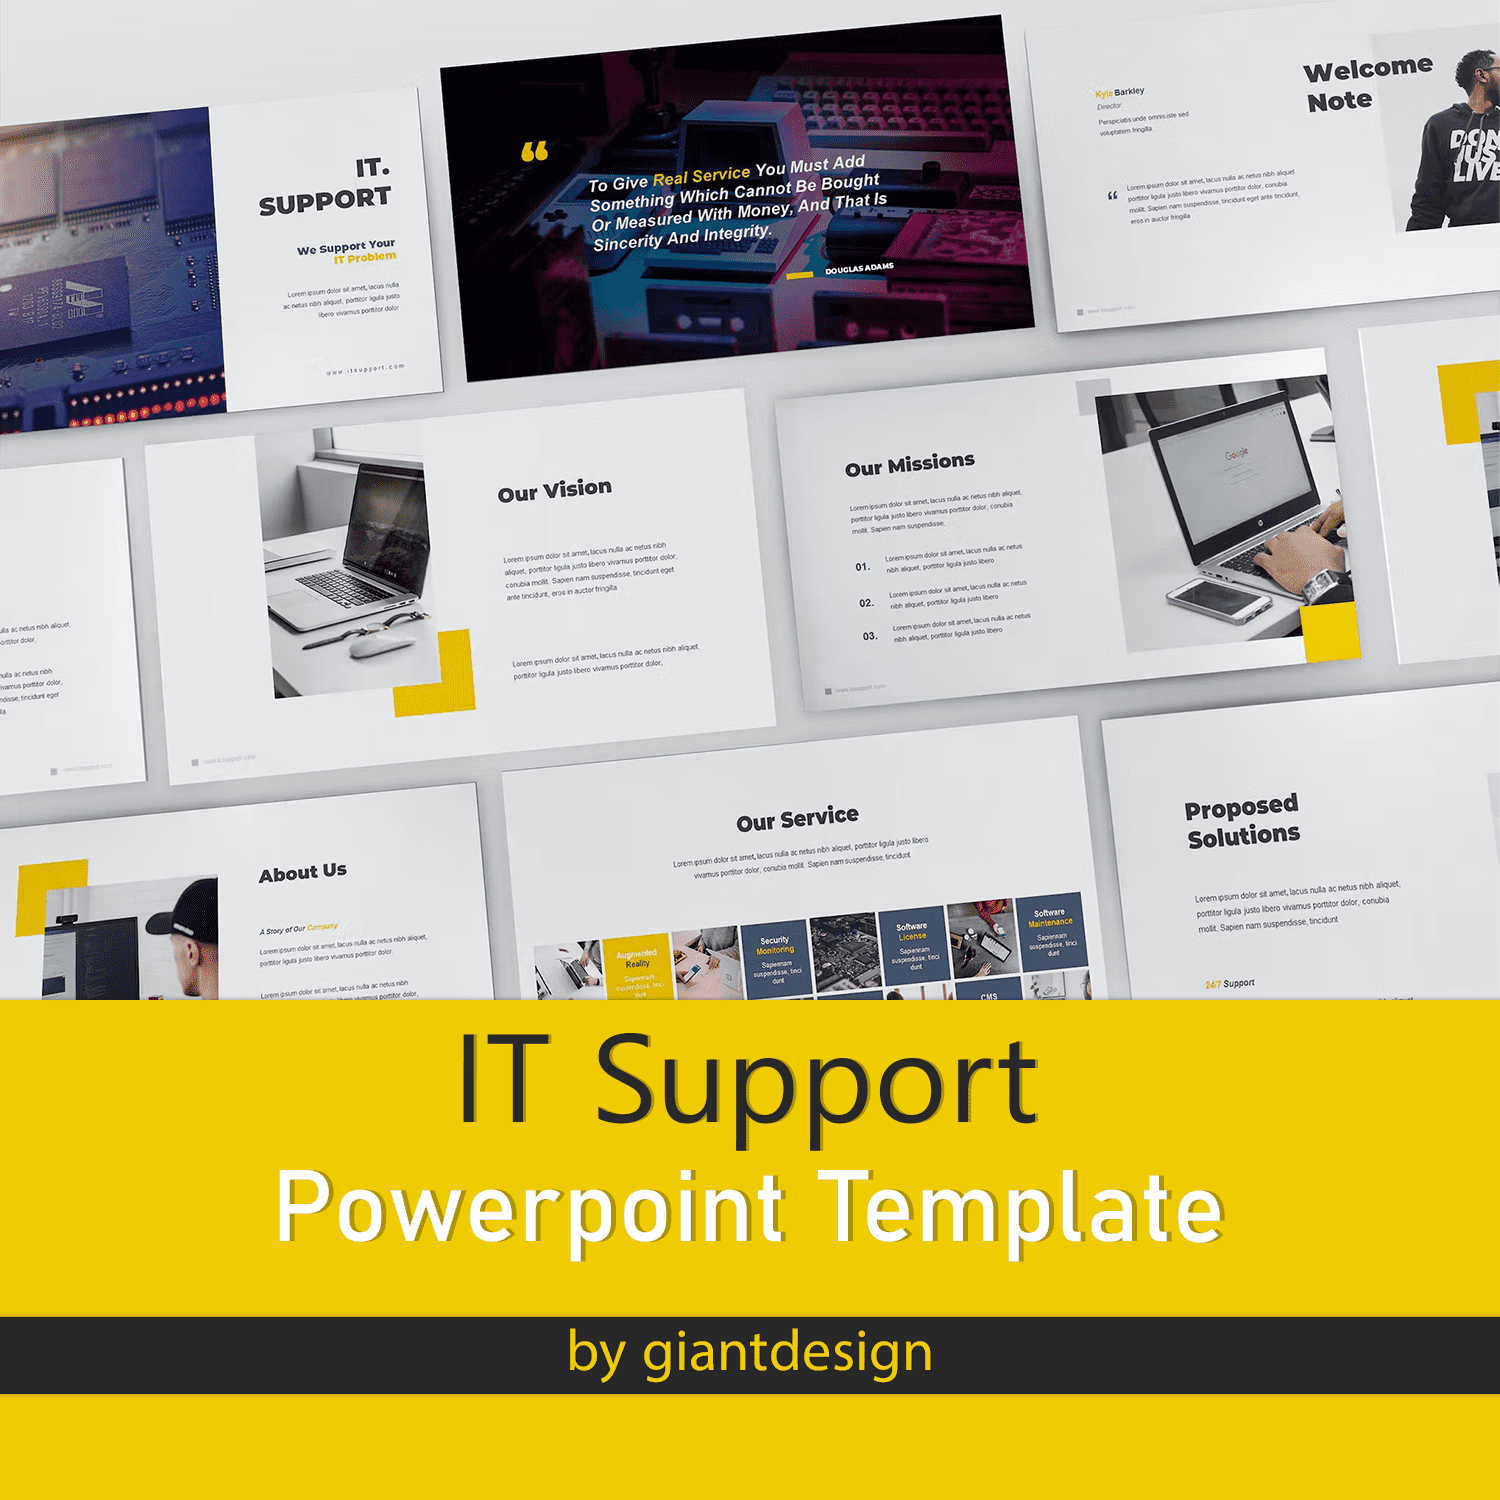 IT Support Powerpoint Template.